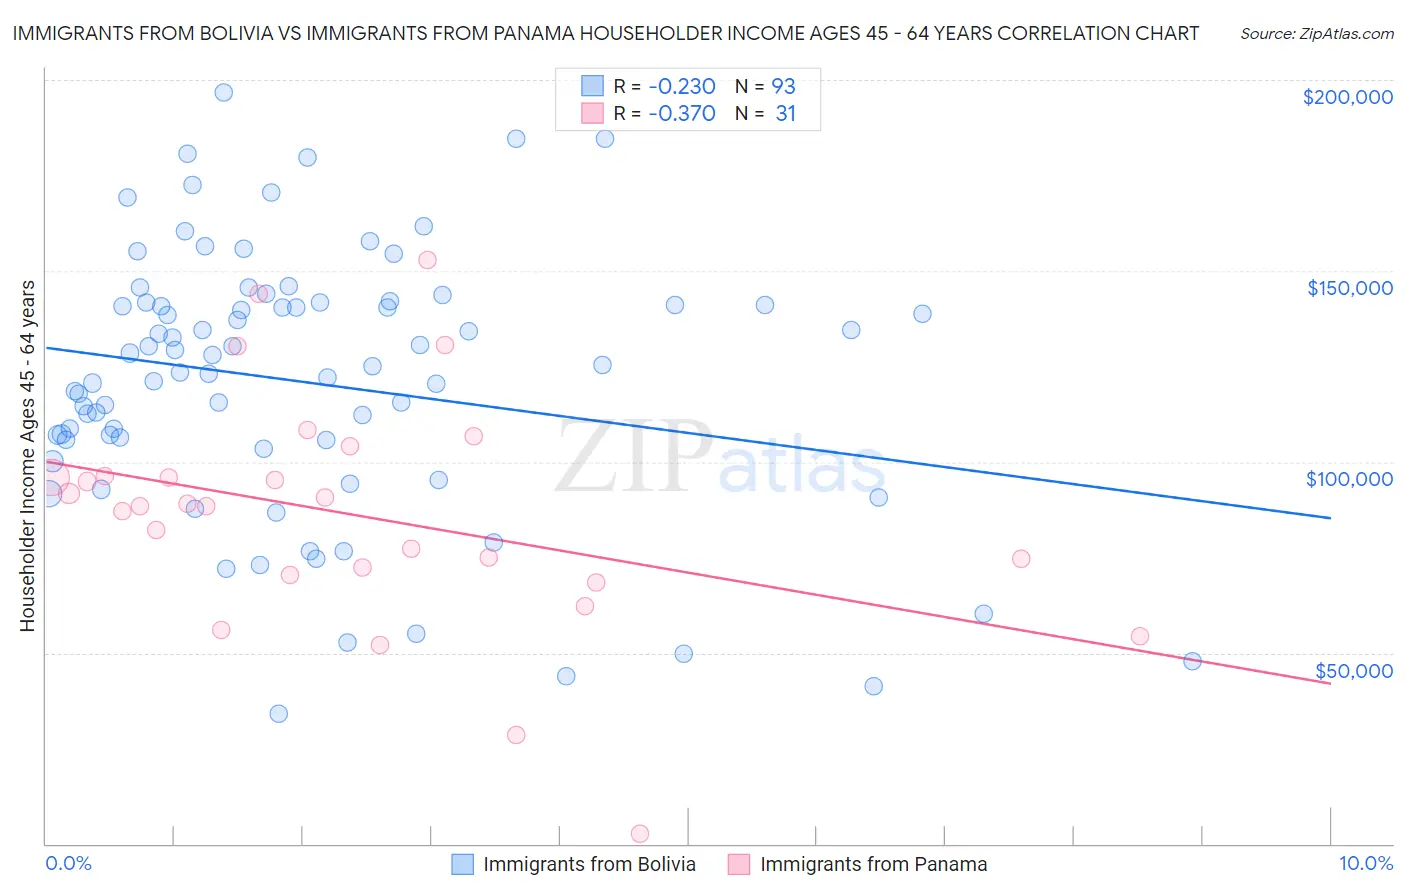 Immigrants from Bolivia vs Immigrants from Panama Householder Income Ages 45 - 64 years